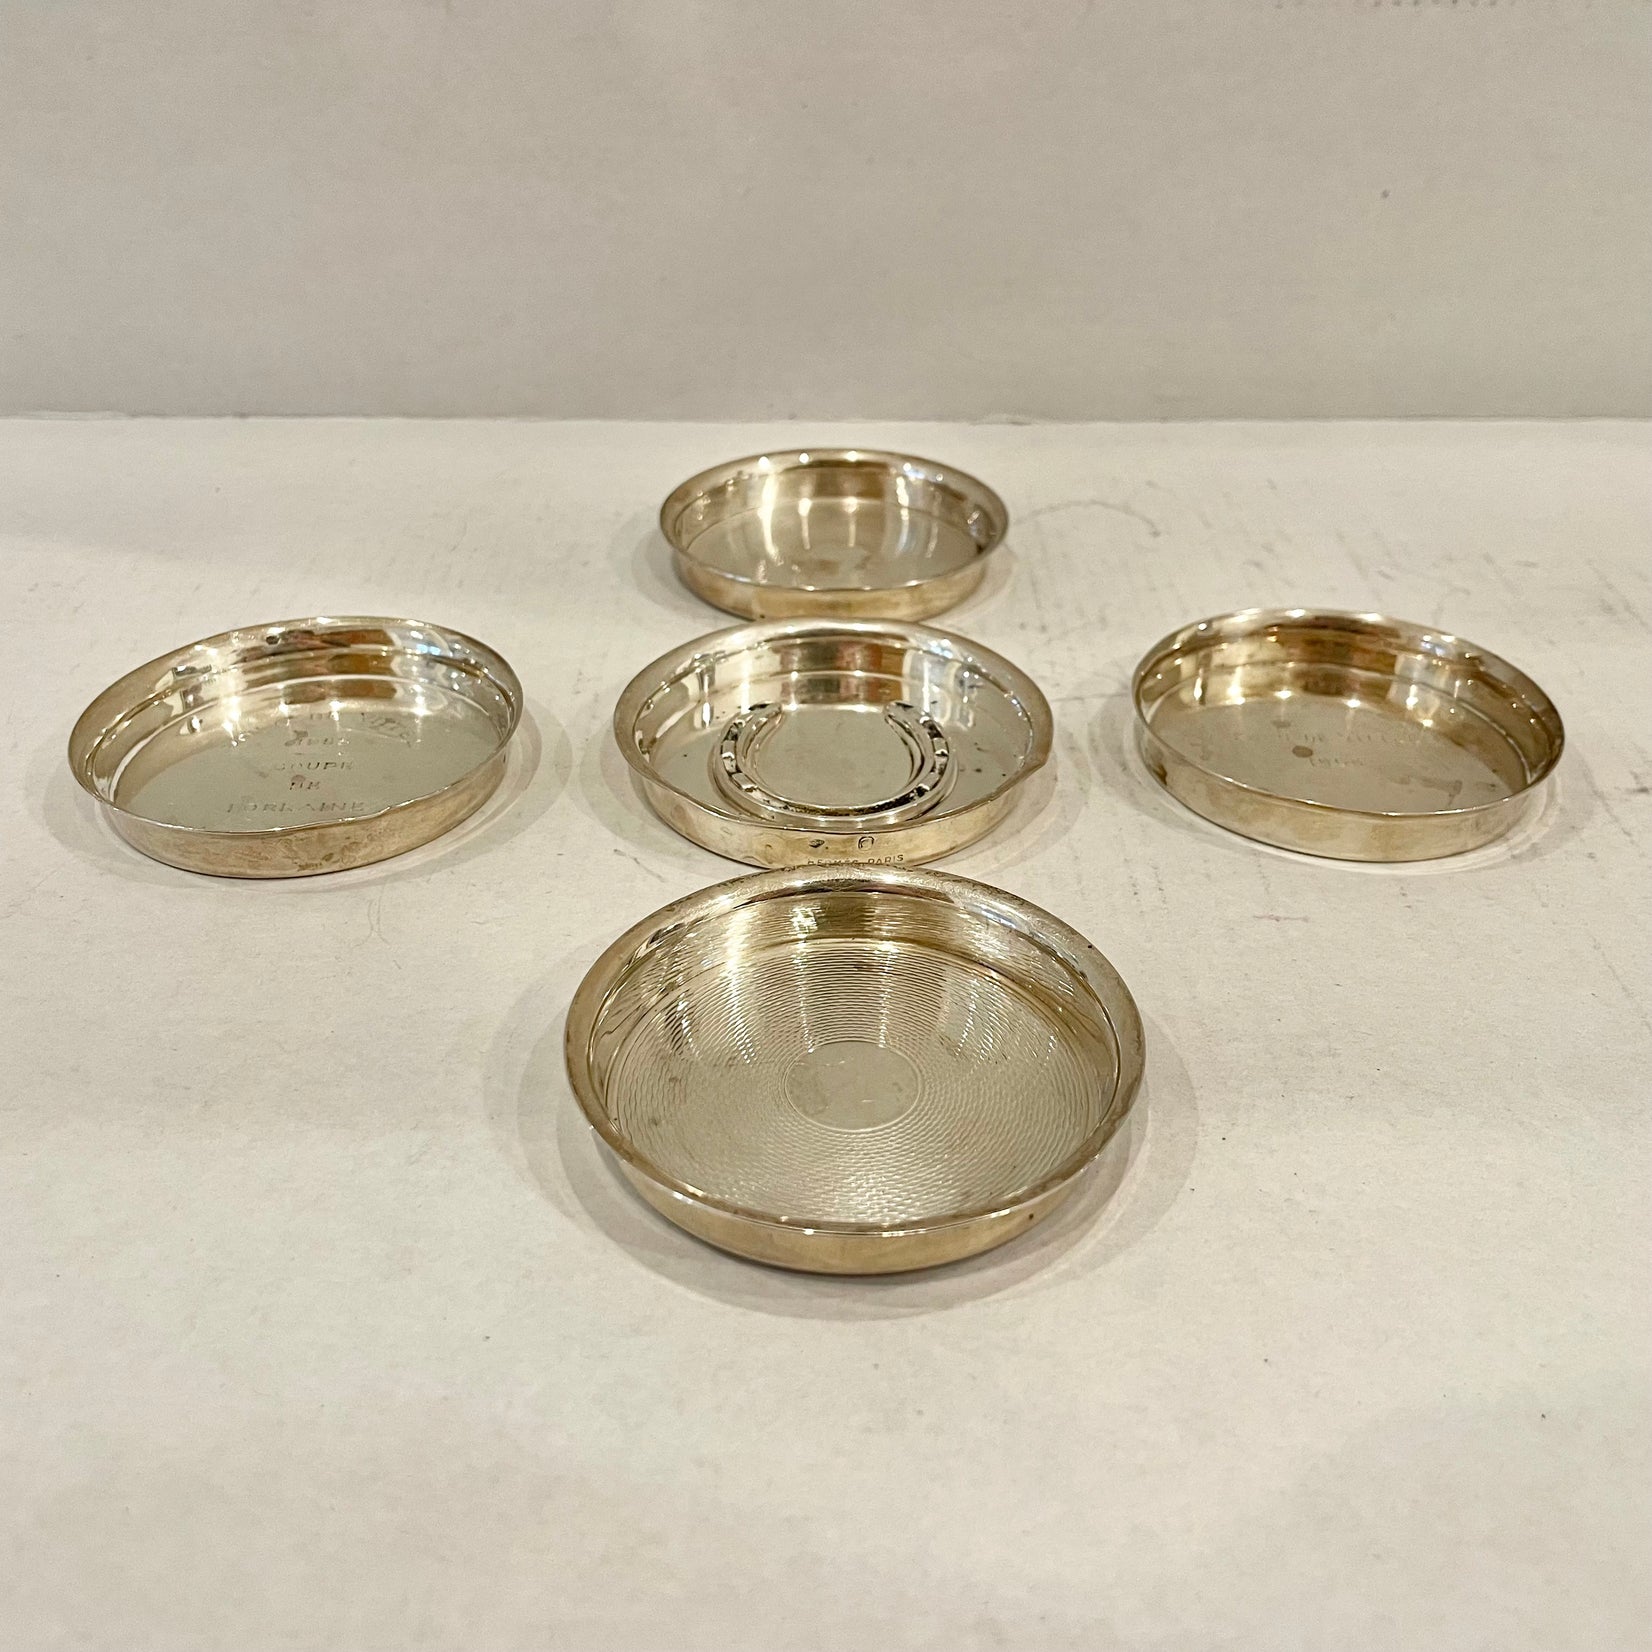 Set of 6 Hermes Silver Plated Jewelry Trays and Cup, 1950s France